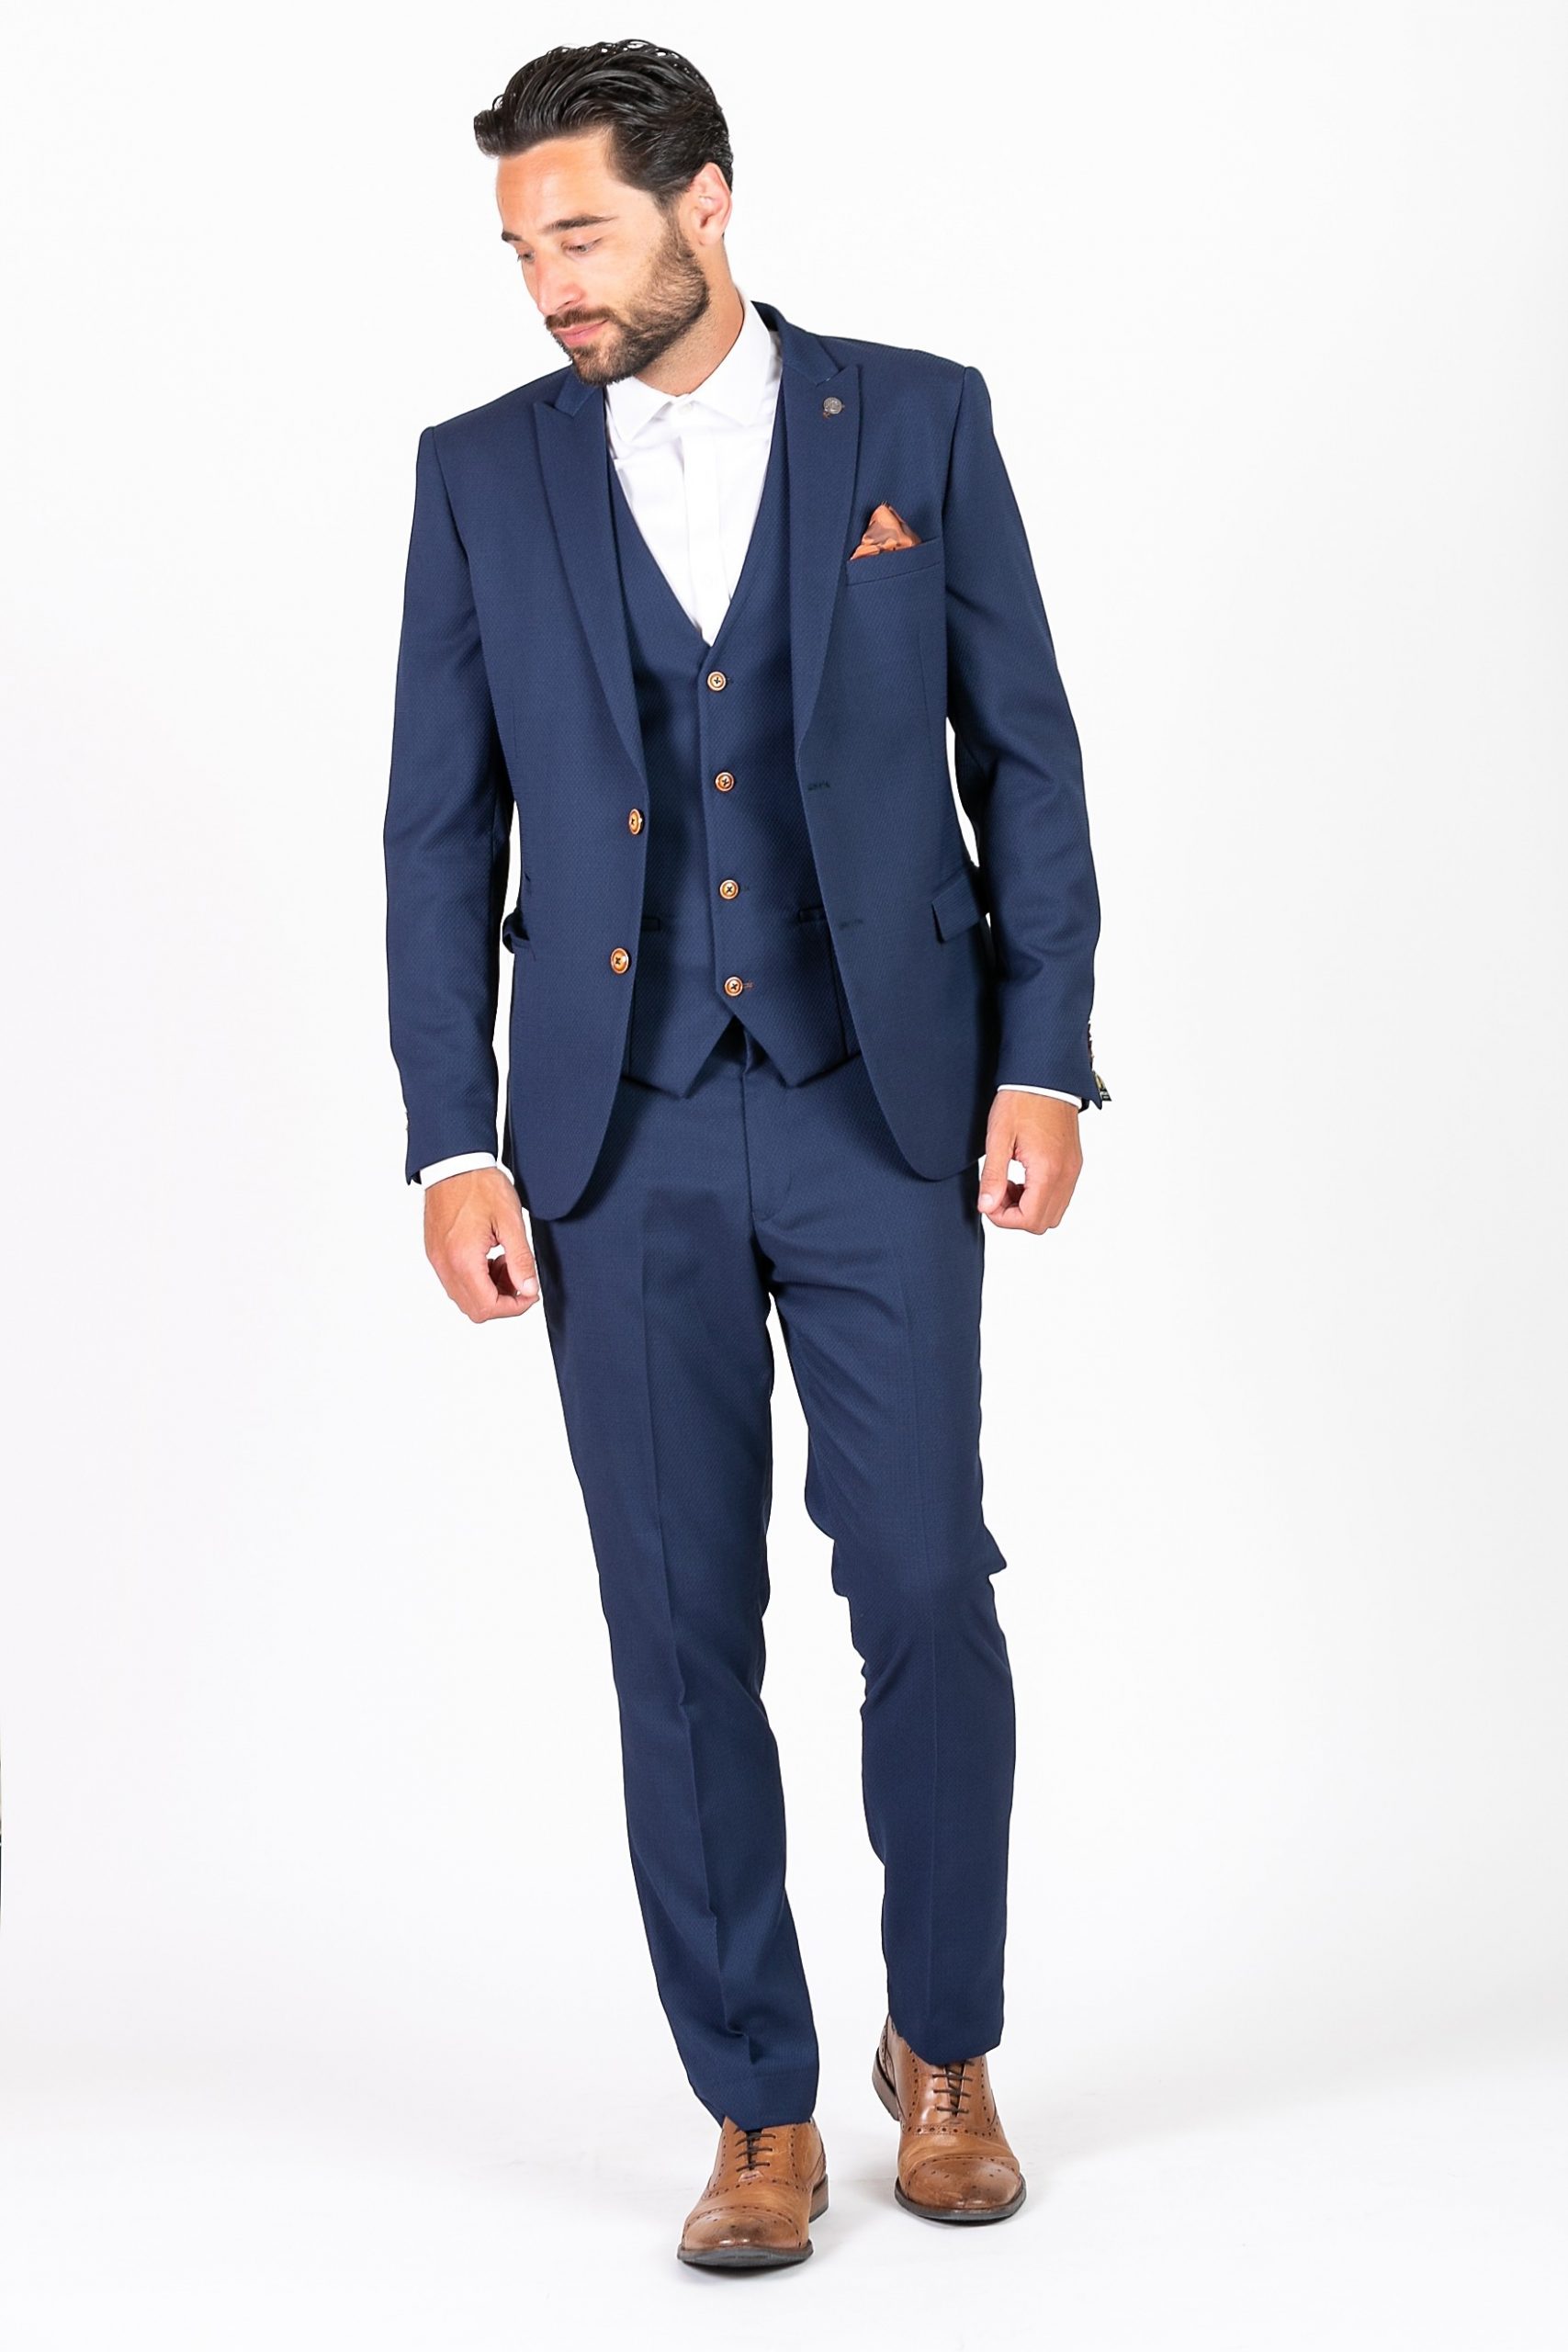 Max Royal Blue Three Piece Suit With Contrast Buttons